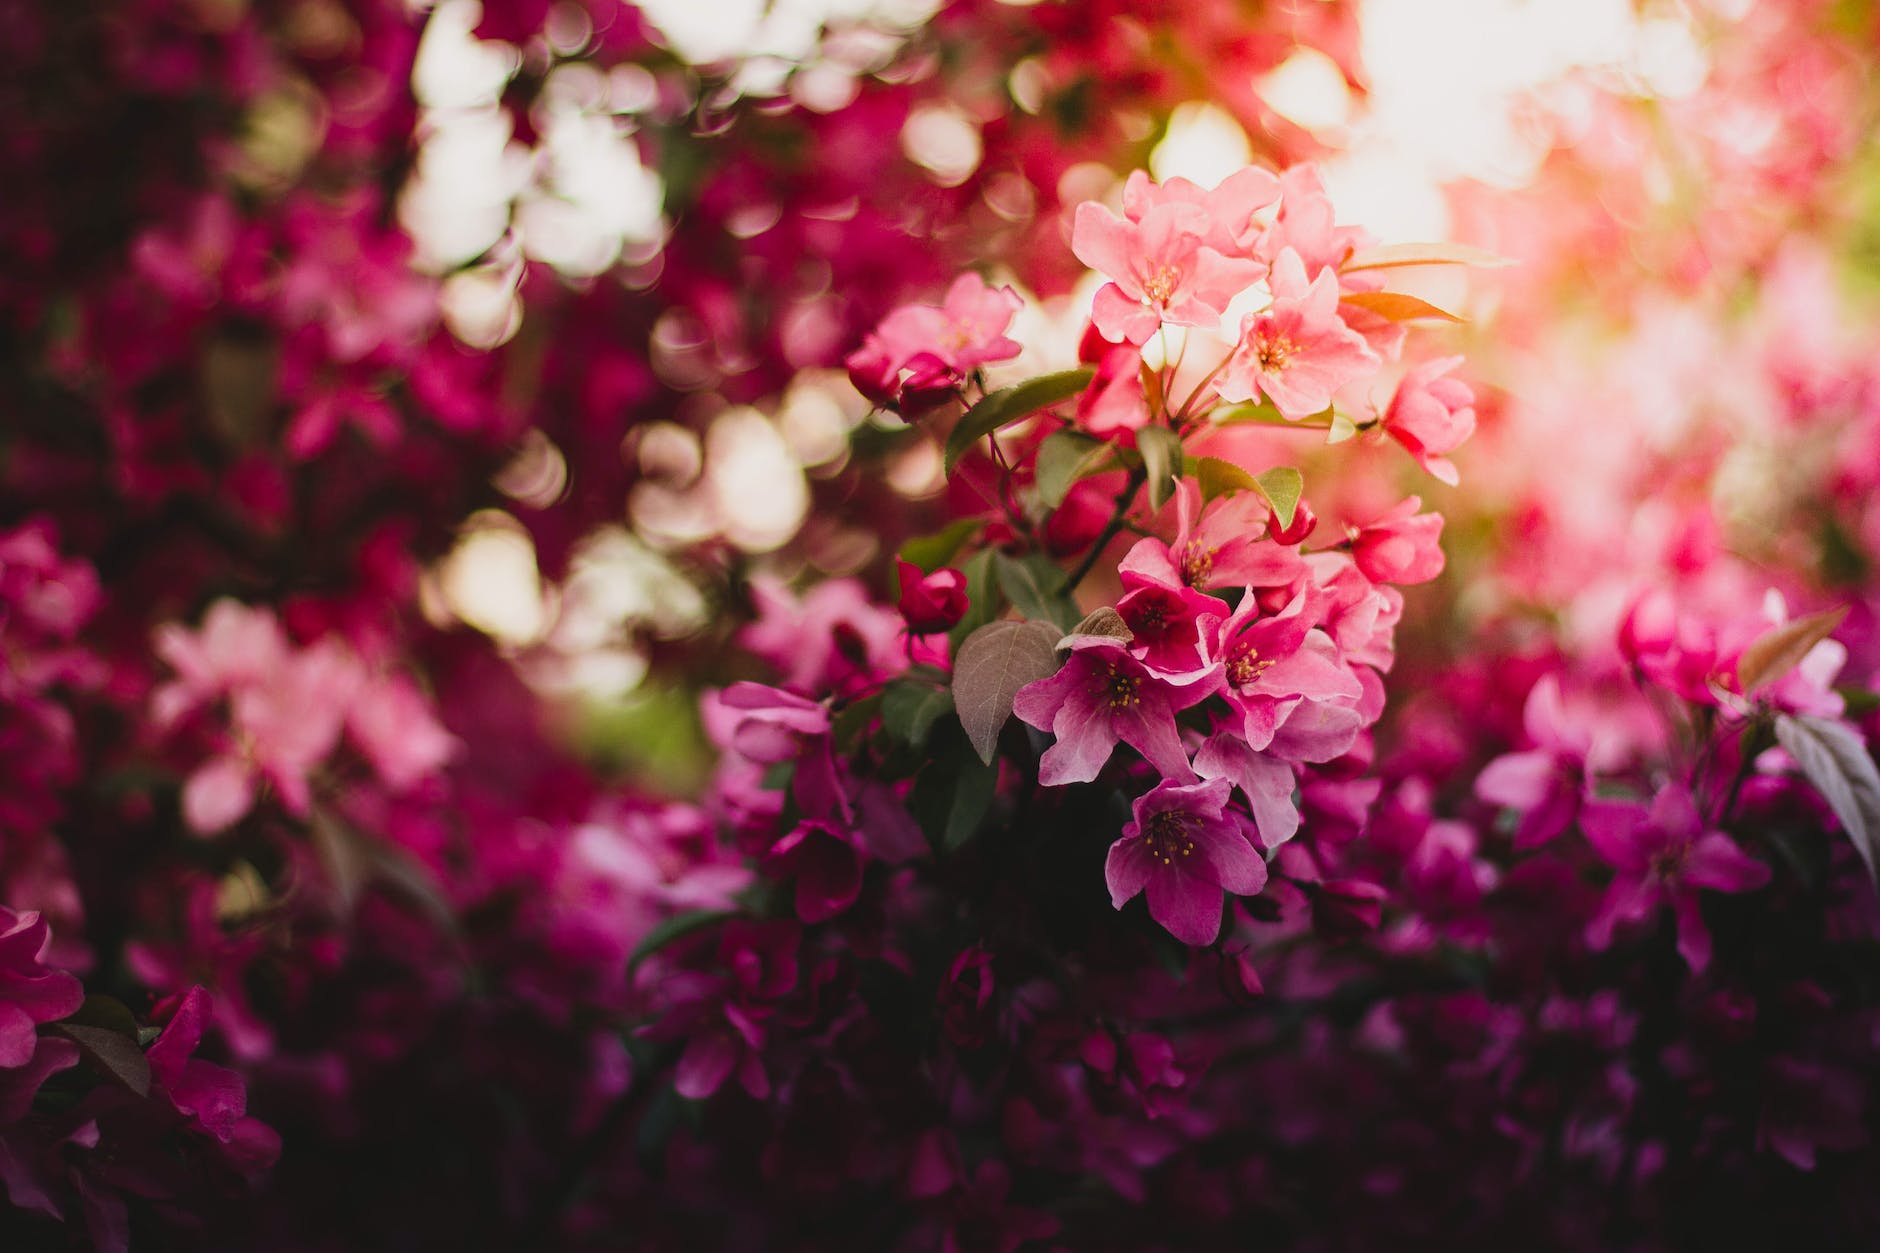 Photograph of pink and darker pink small flowers in a bunch on a tree. There's light in the background